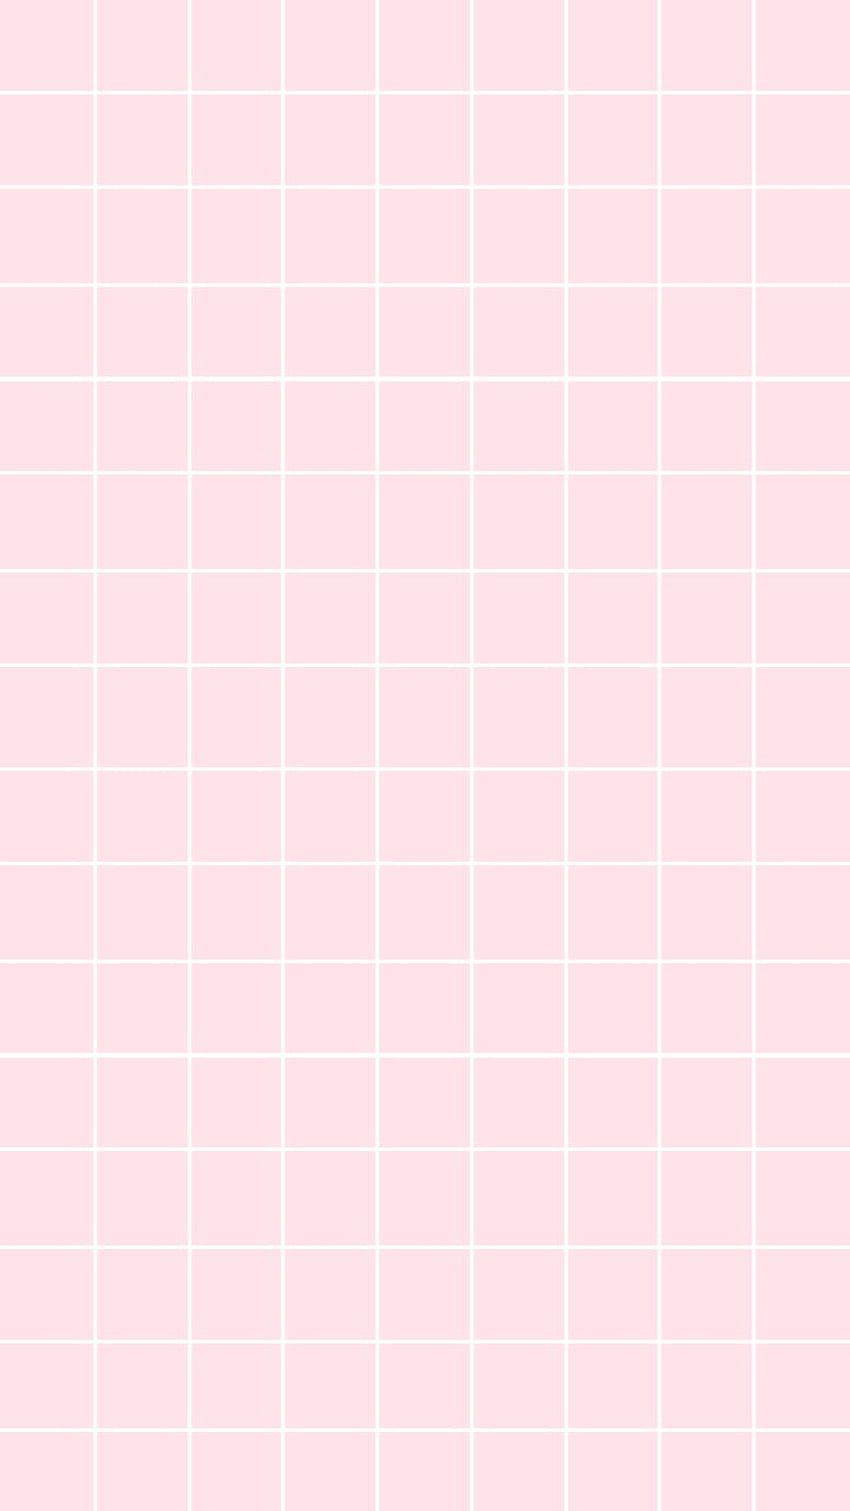 Download Brighten up your day with a beautiful pink and white aesthetic  Wallpaper  Wallpaperscom